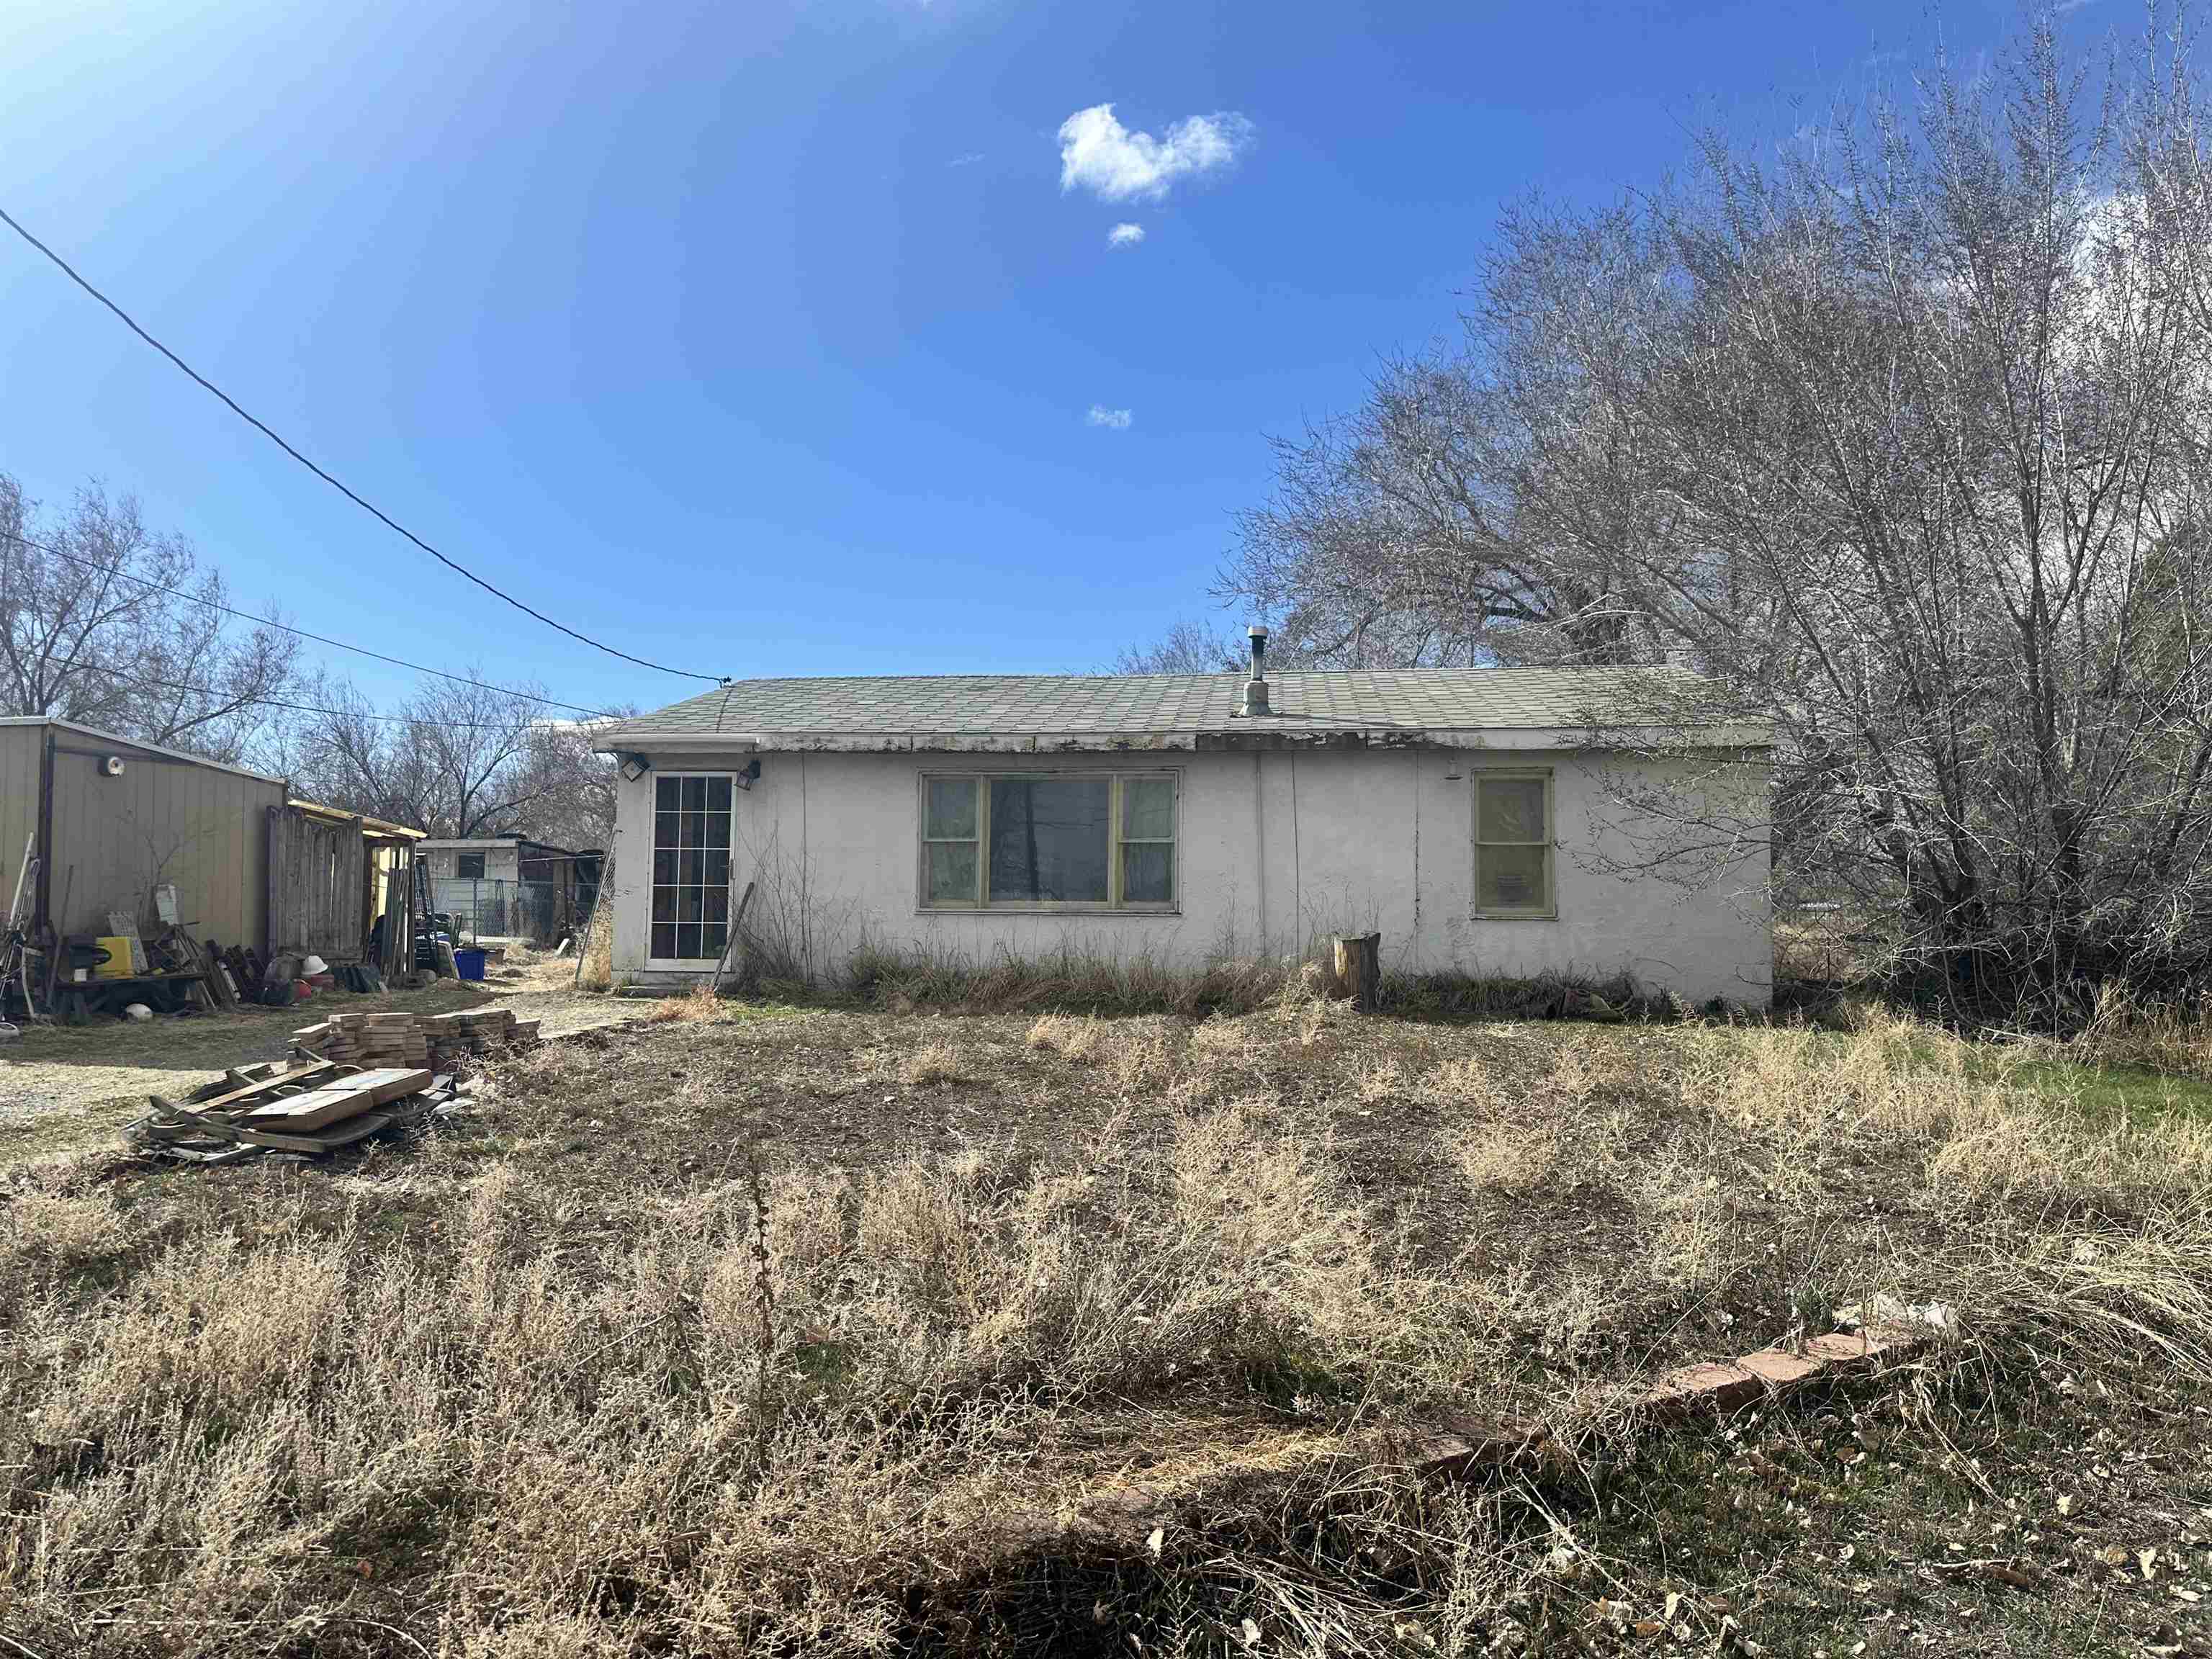 615 33 Road, Clifton, CO 